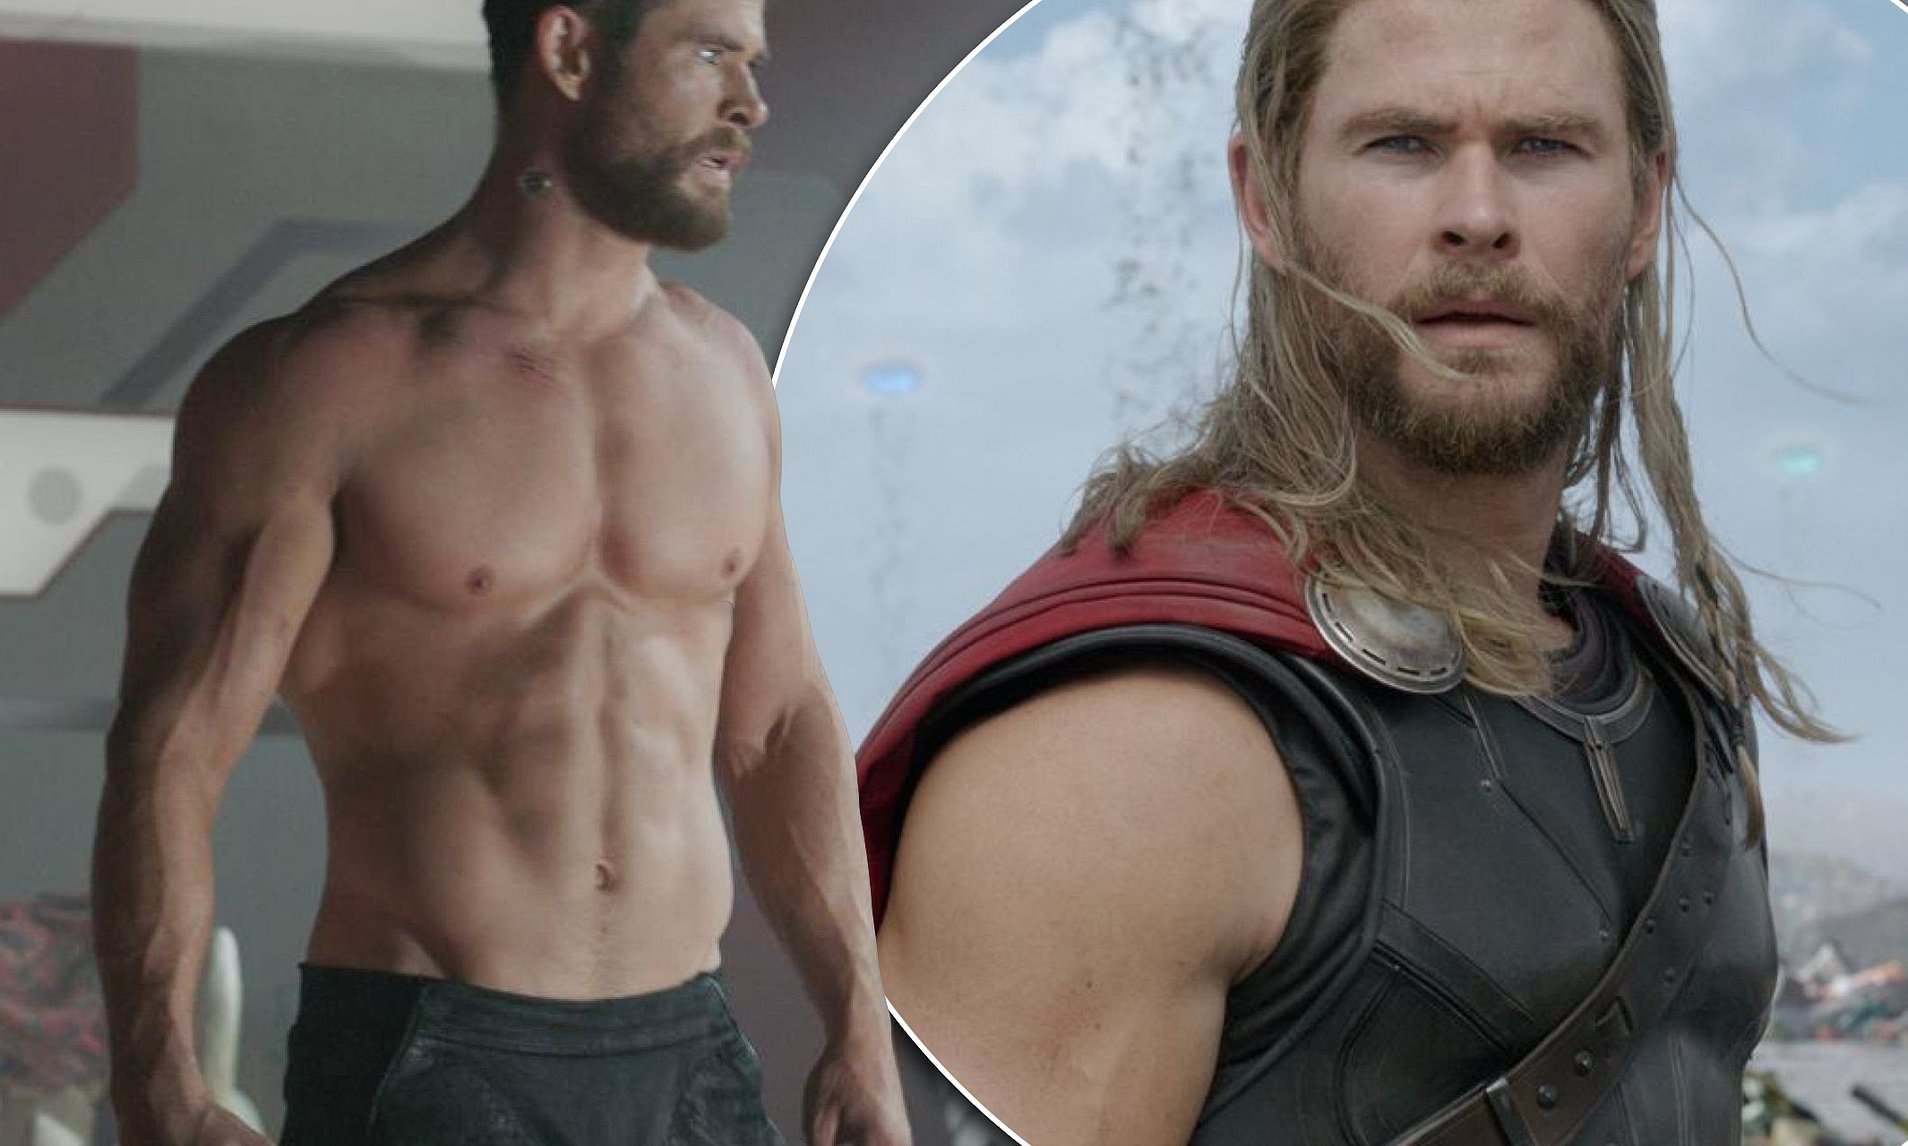 Chris Hemsworth Wiki, Bio, Age, Net Worth, and Other Facts